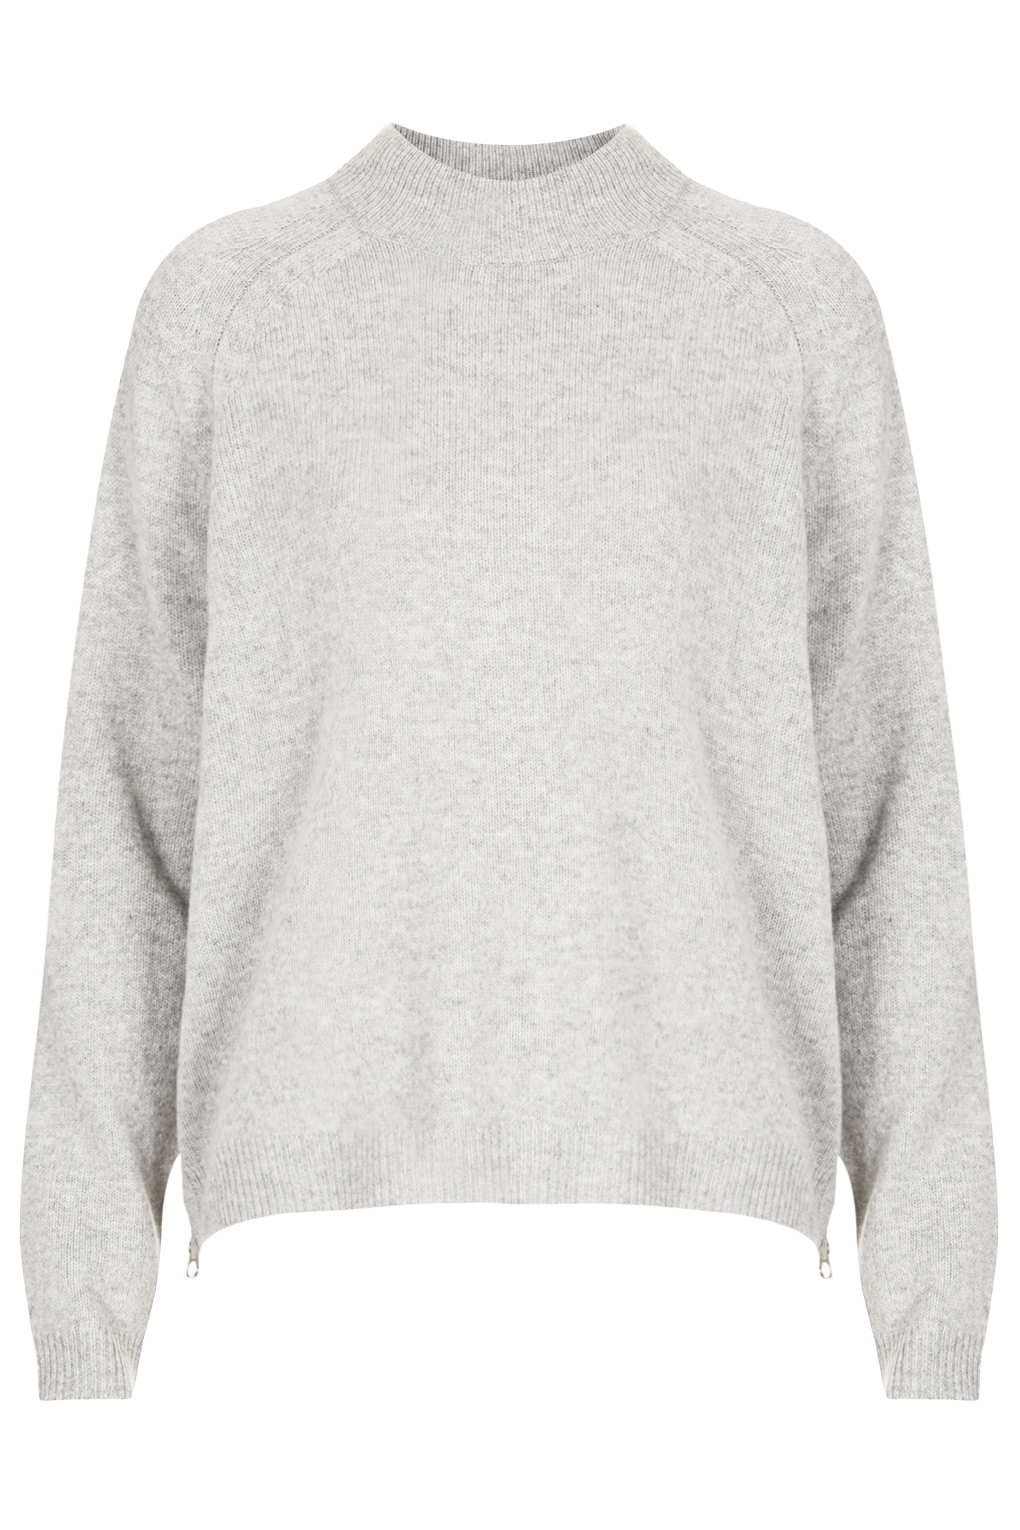 TOPSHOP Knitted Turtle Neck Jumper in Grey Marl (Grey) - Lyst